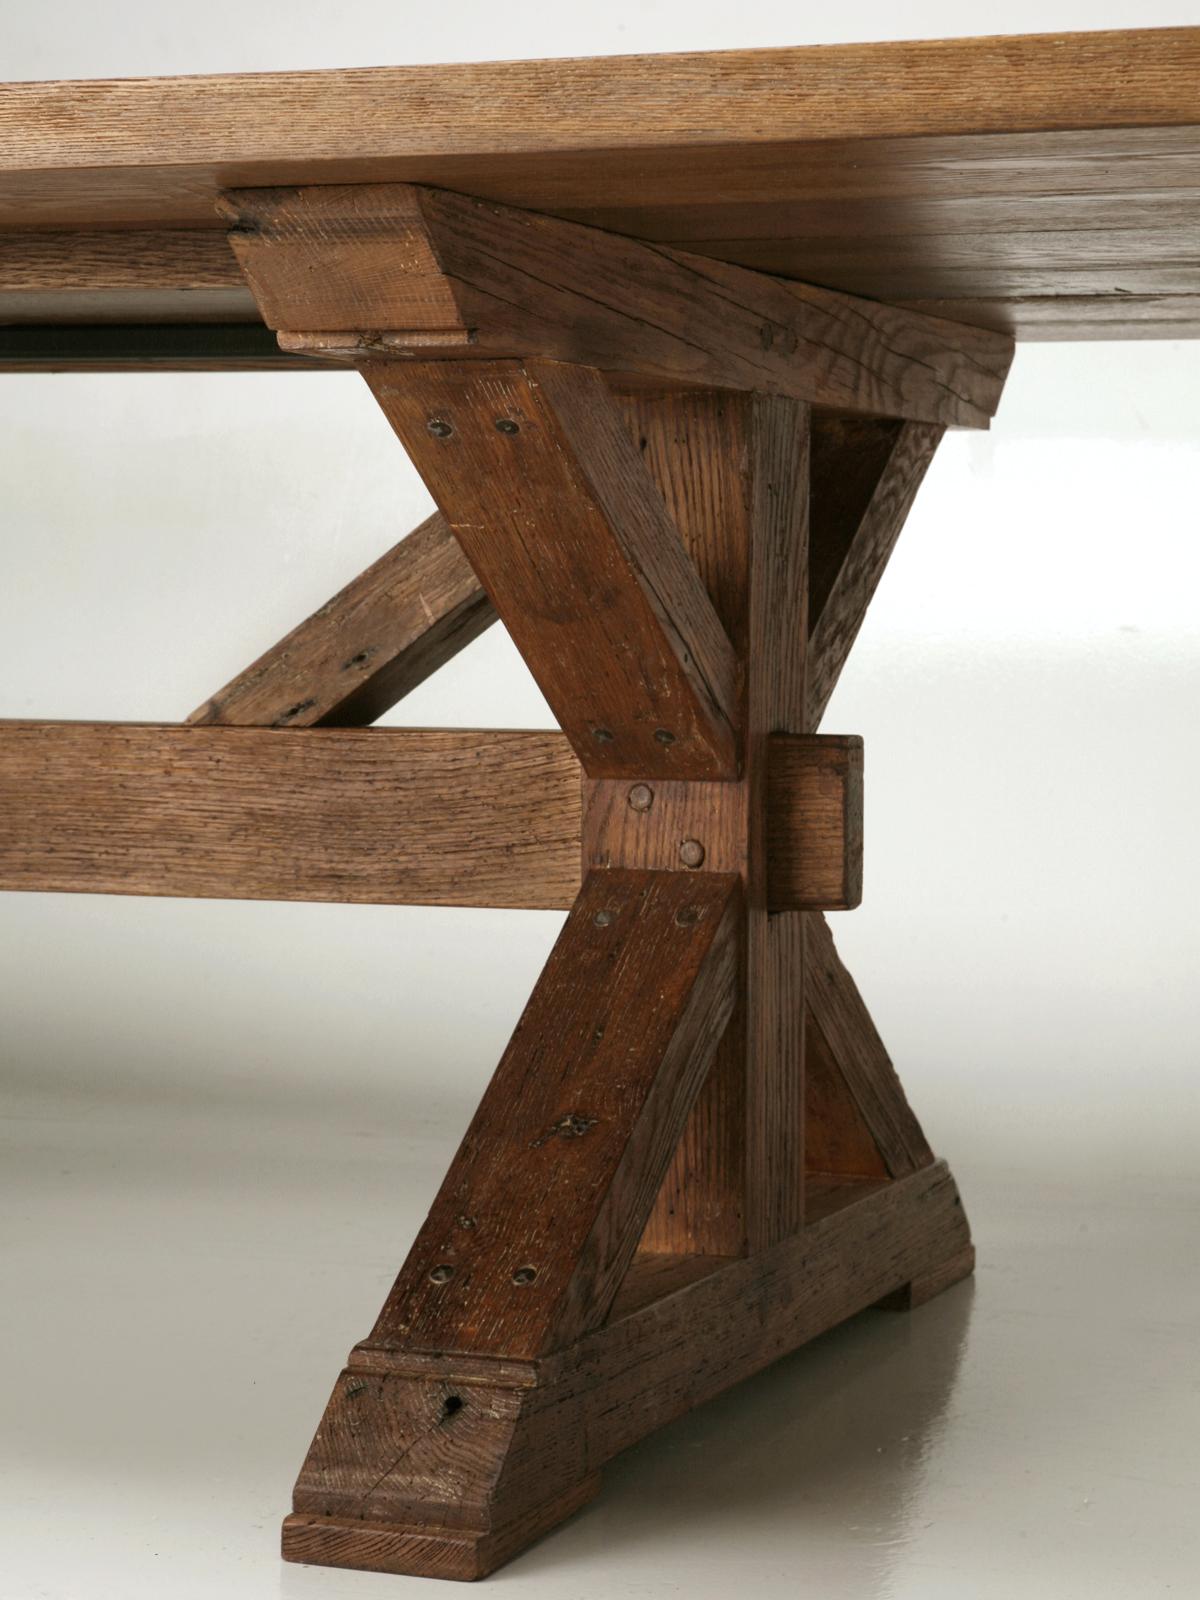 Hand-Crafted French Inspired Dining or Farm Table Reclaimed Oak Made to Order Any Size, Color For Sale